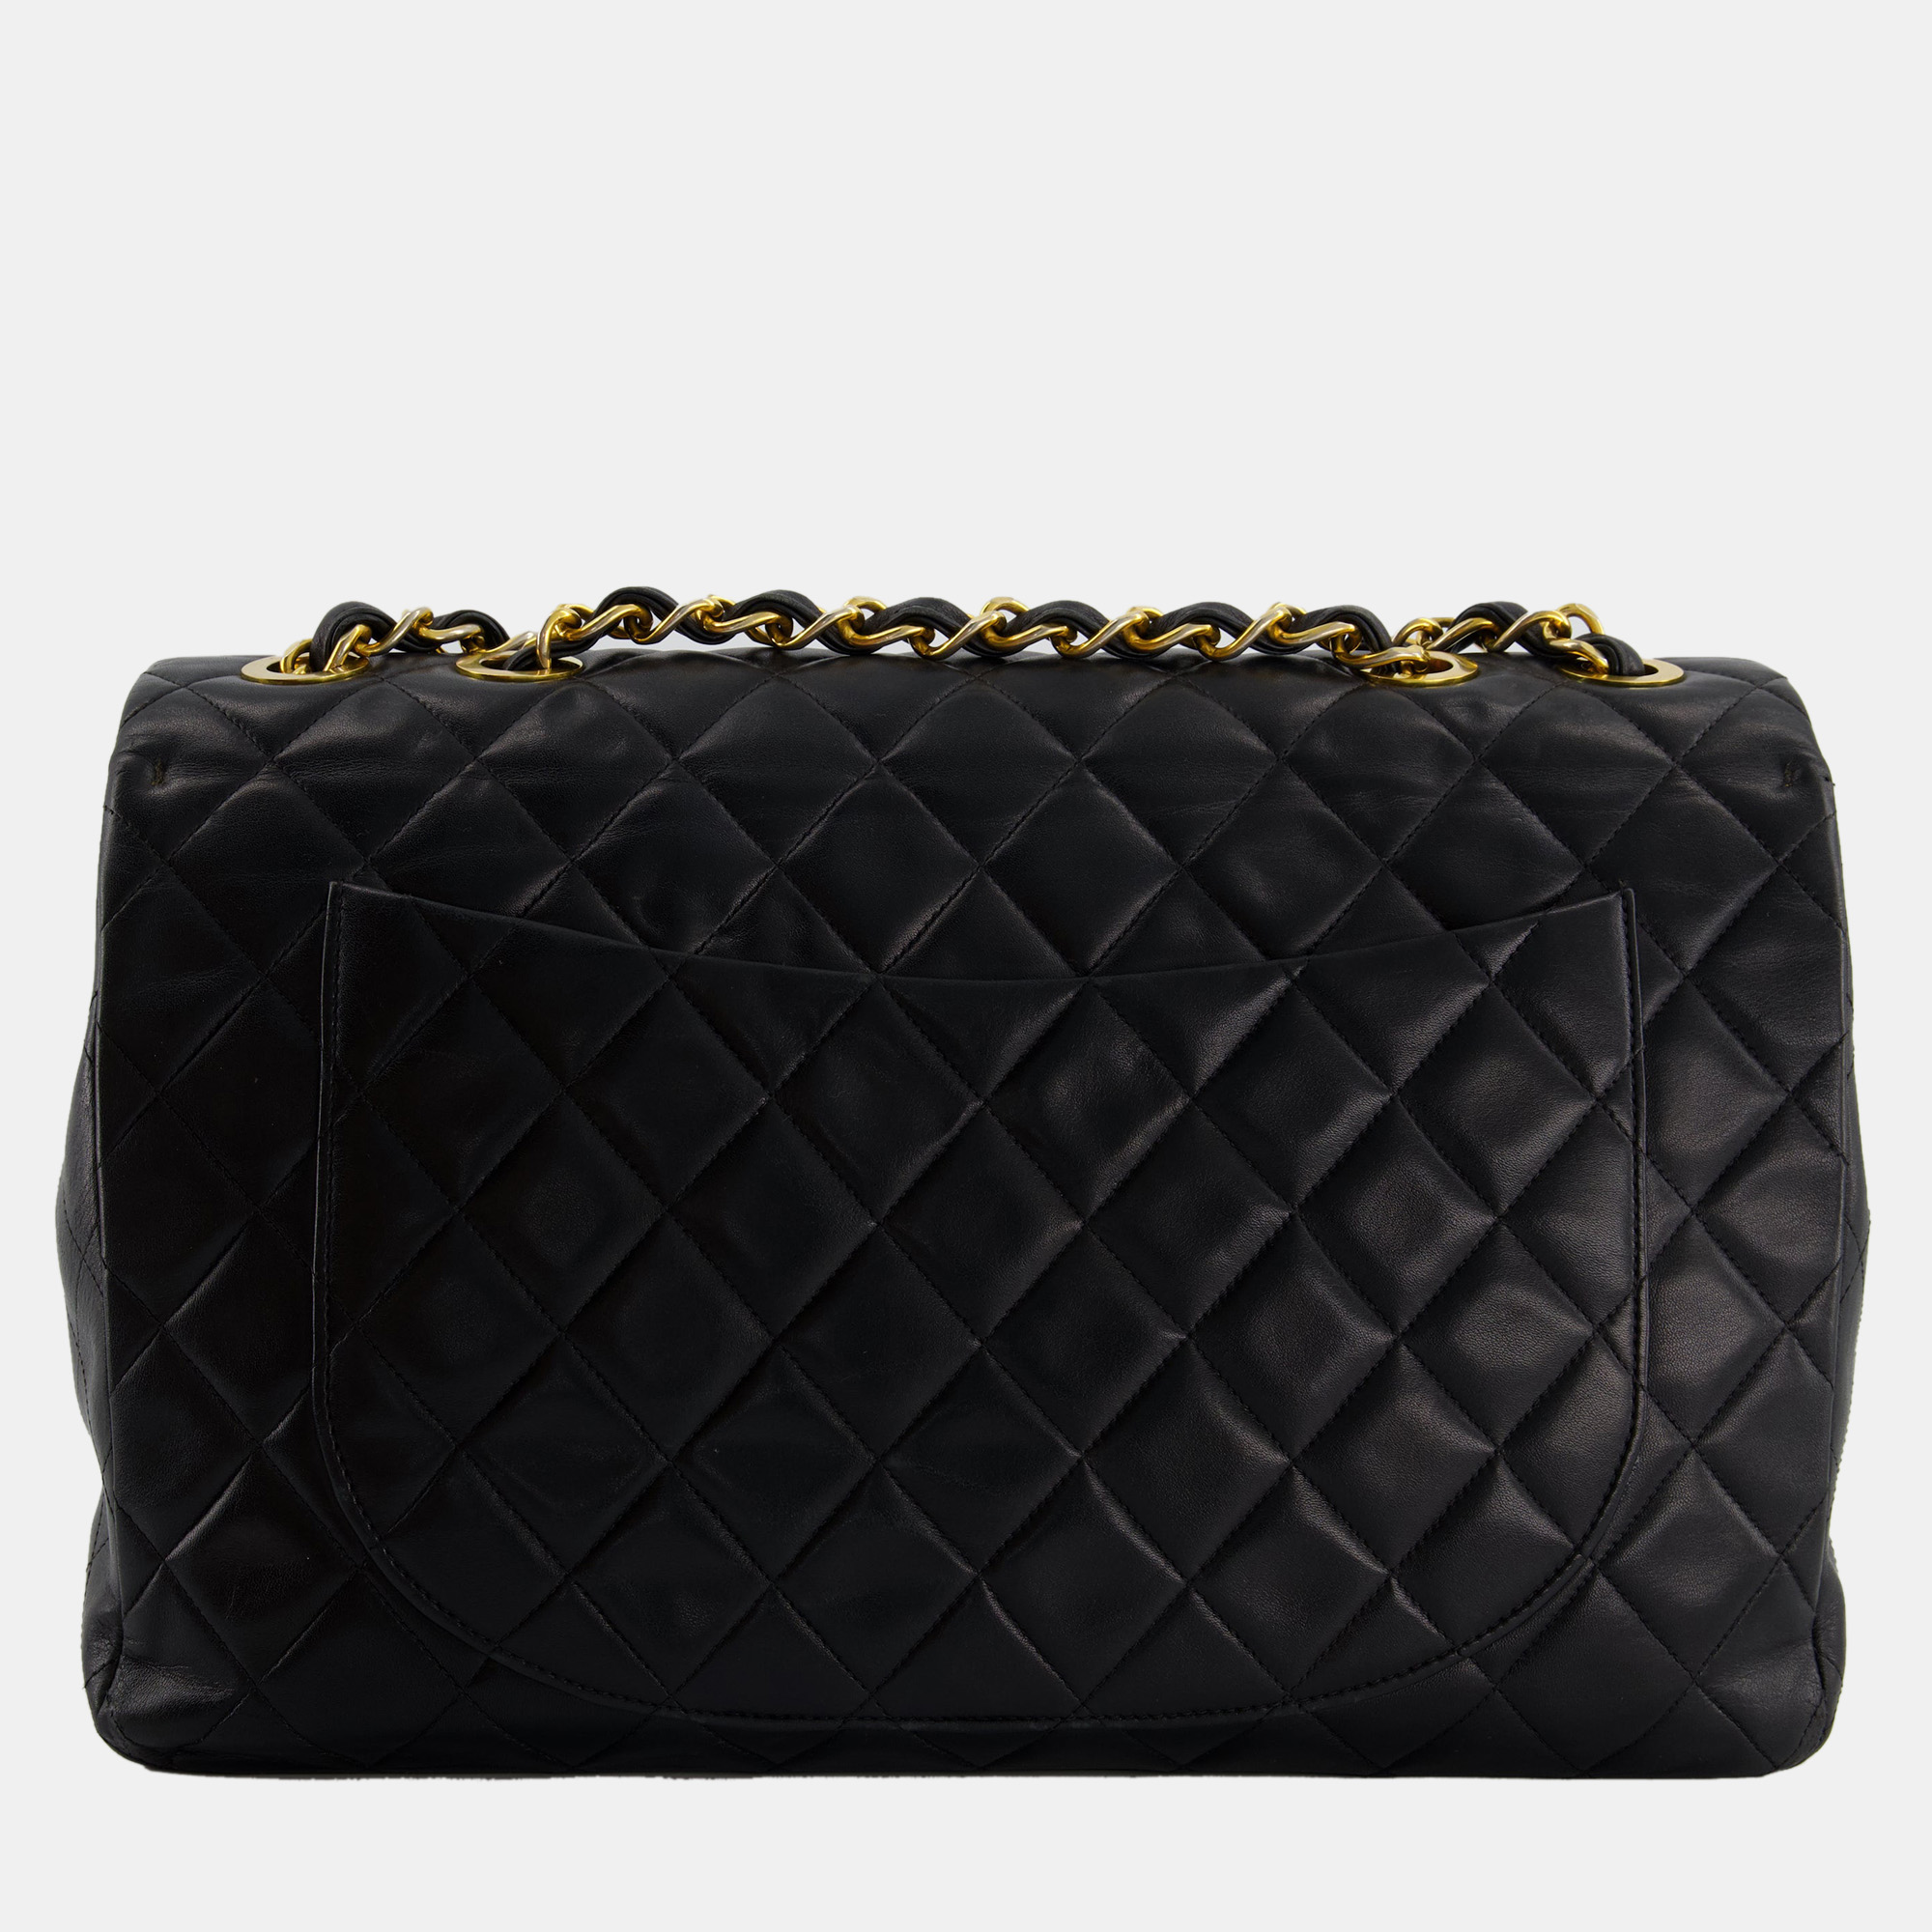 Chanel Navy Vintage Maxi Mademoiselle Single Flap Bag In Lambskin With 24K Gold Hardware